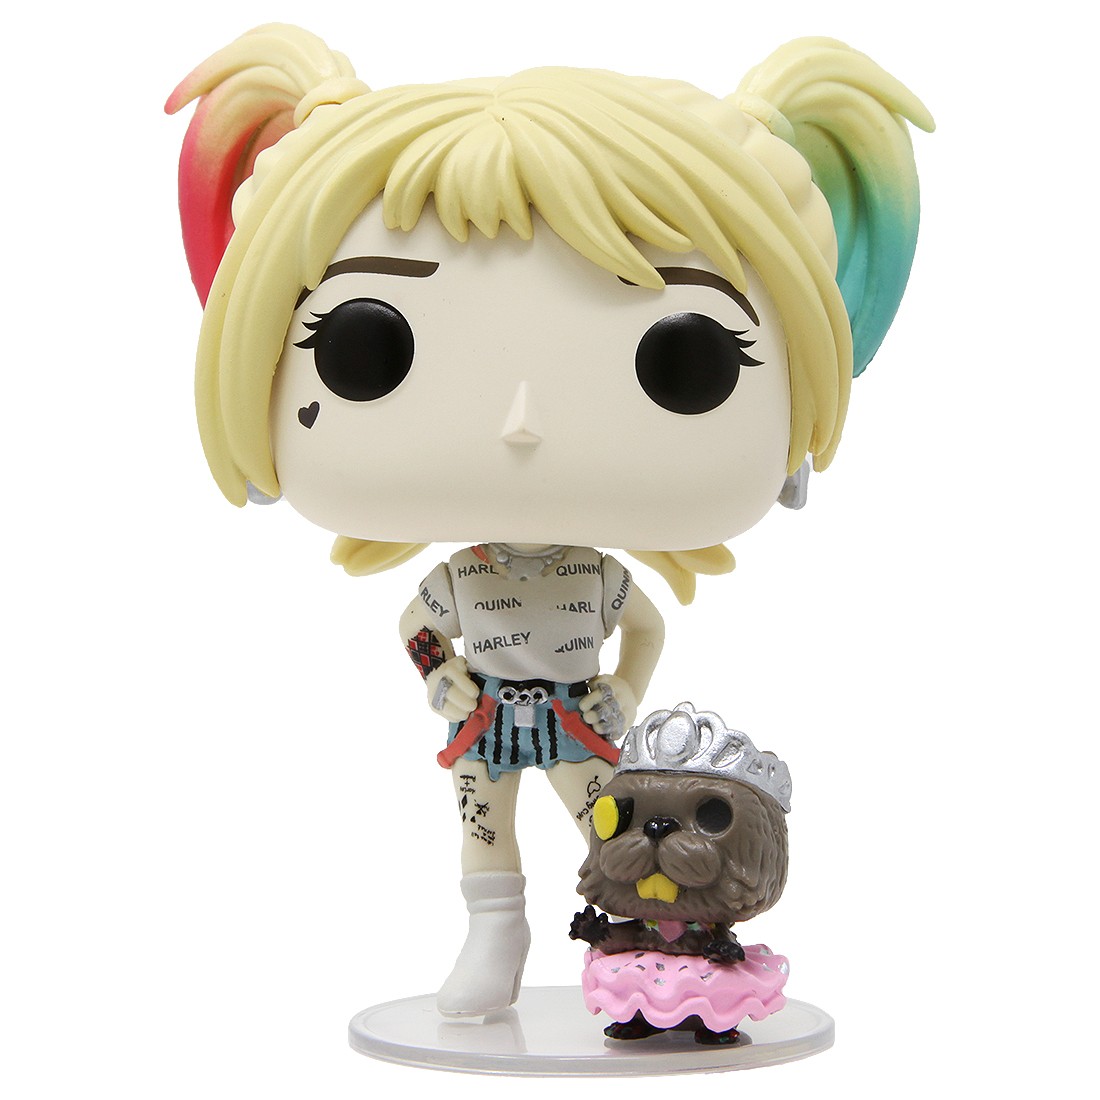 Buy Pop! Harley Quinn with Cards at Funko.